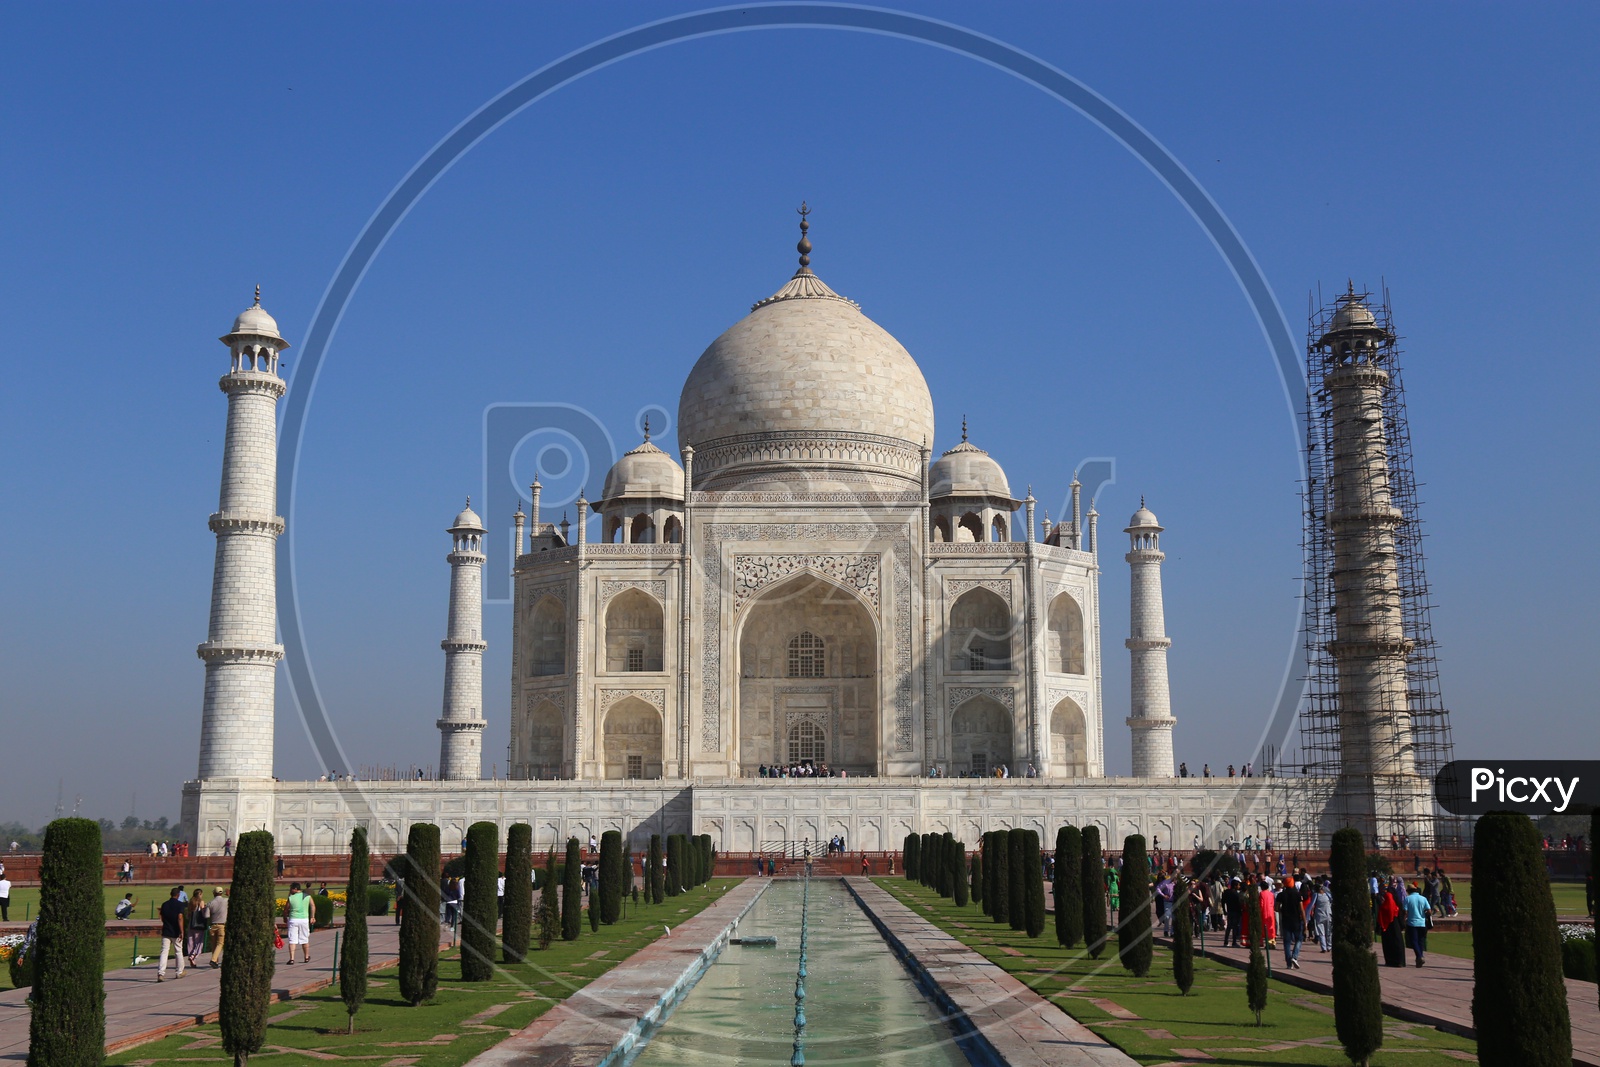 A Beautiful Composition Shot Of Taj Mahal With Blue Sky In Background